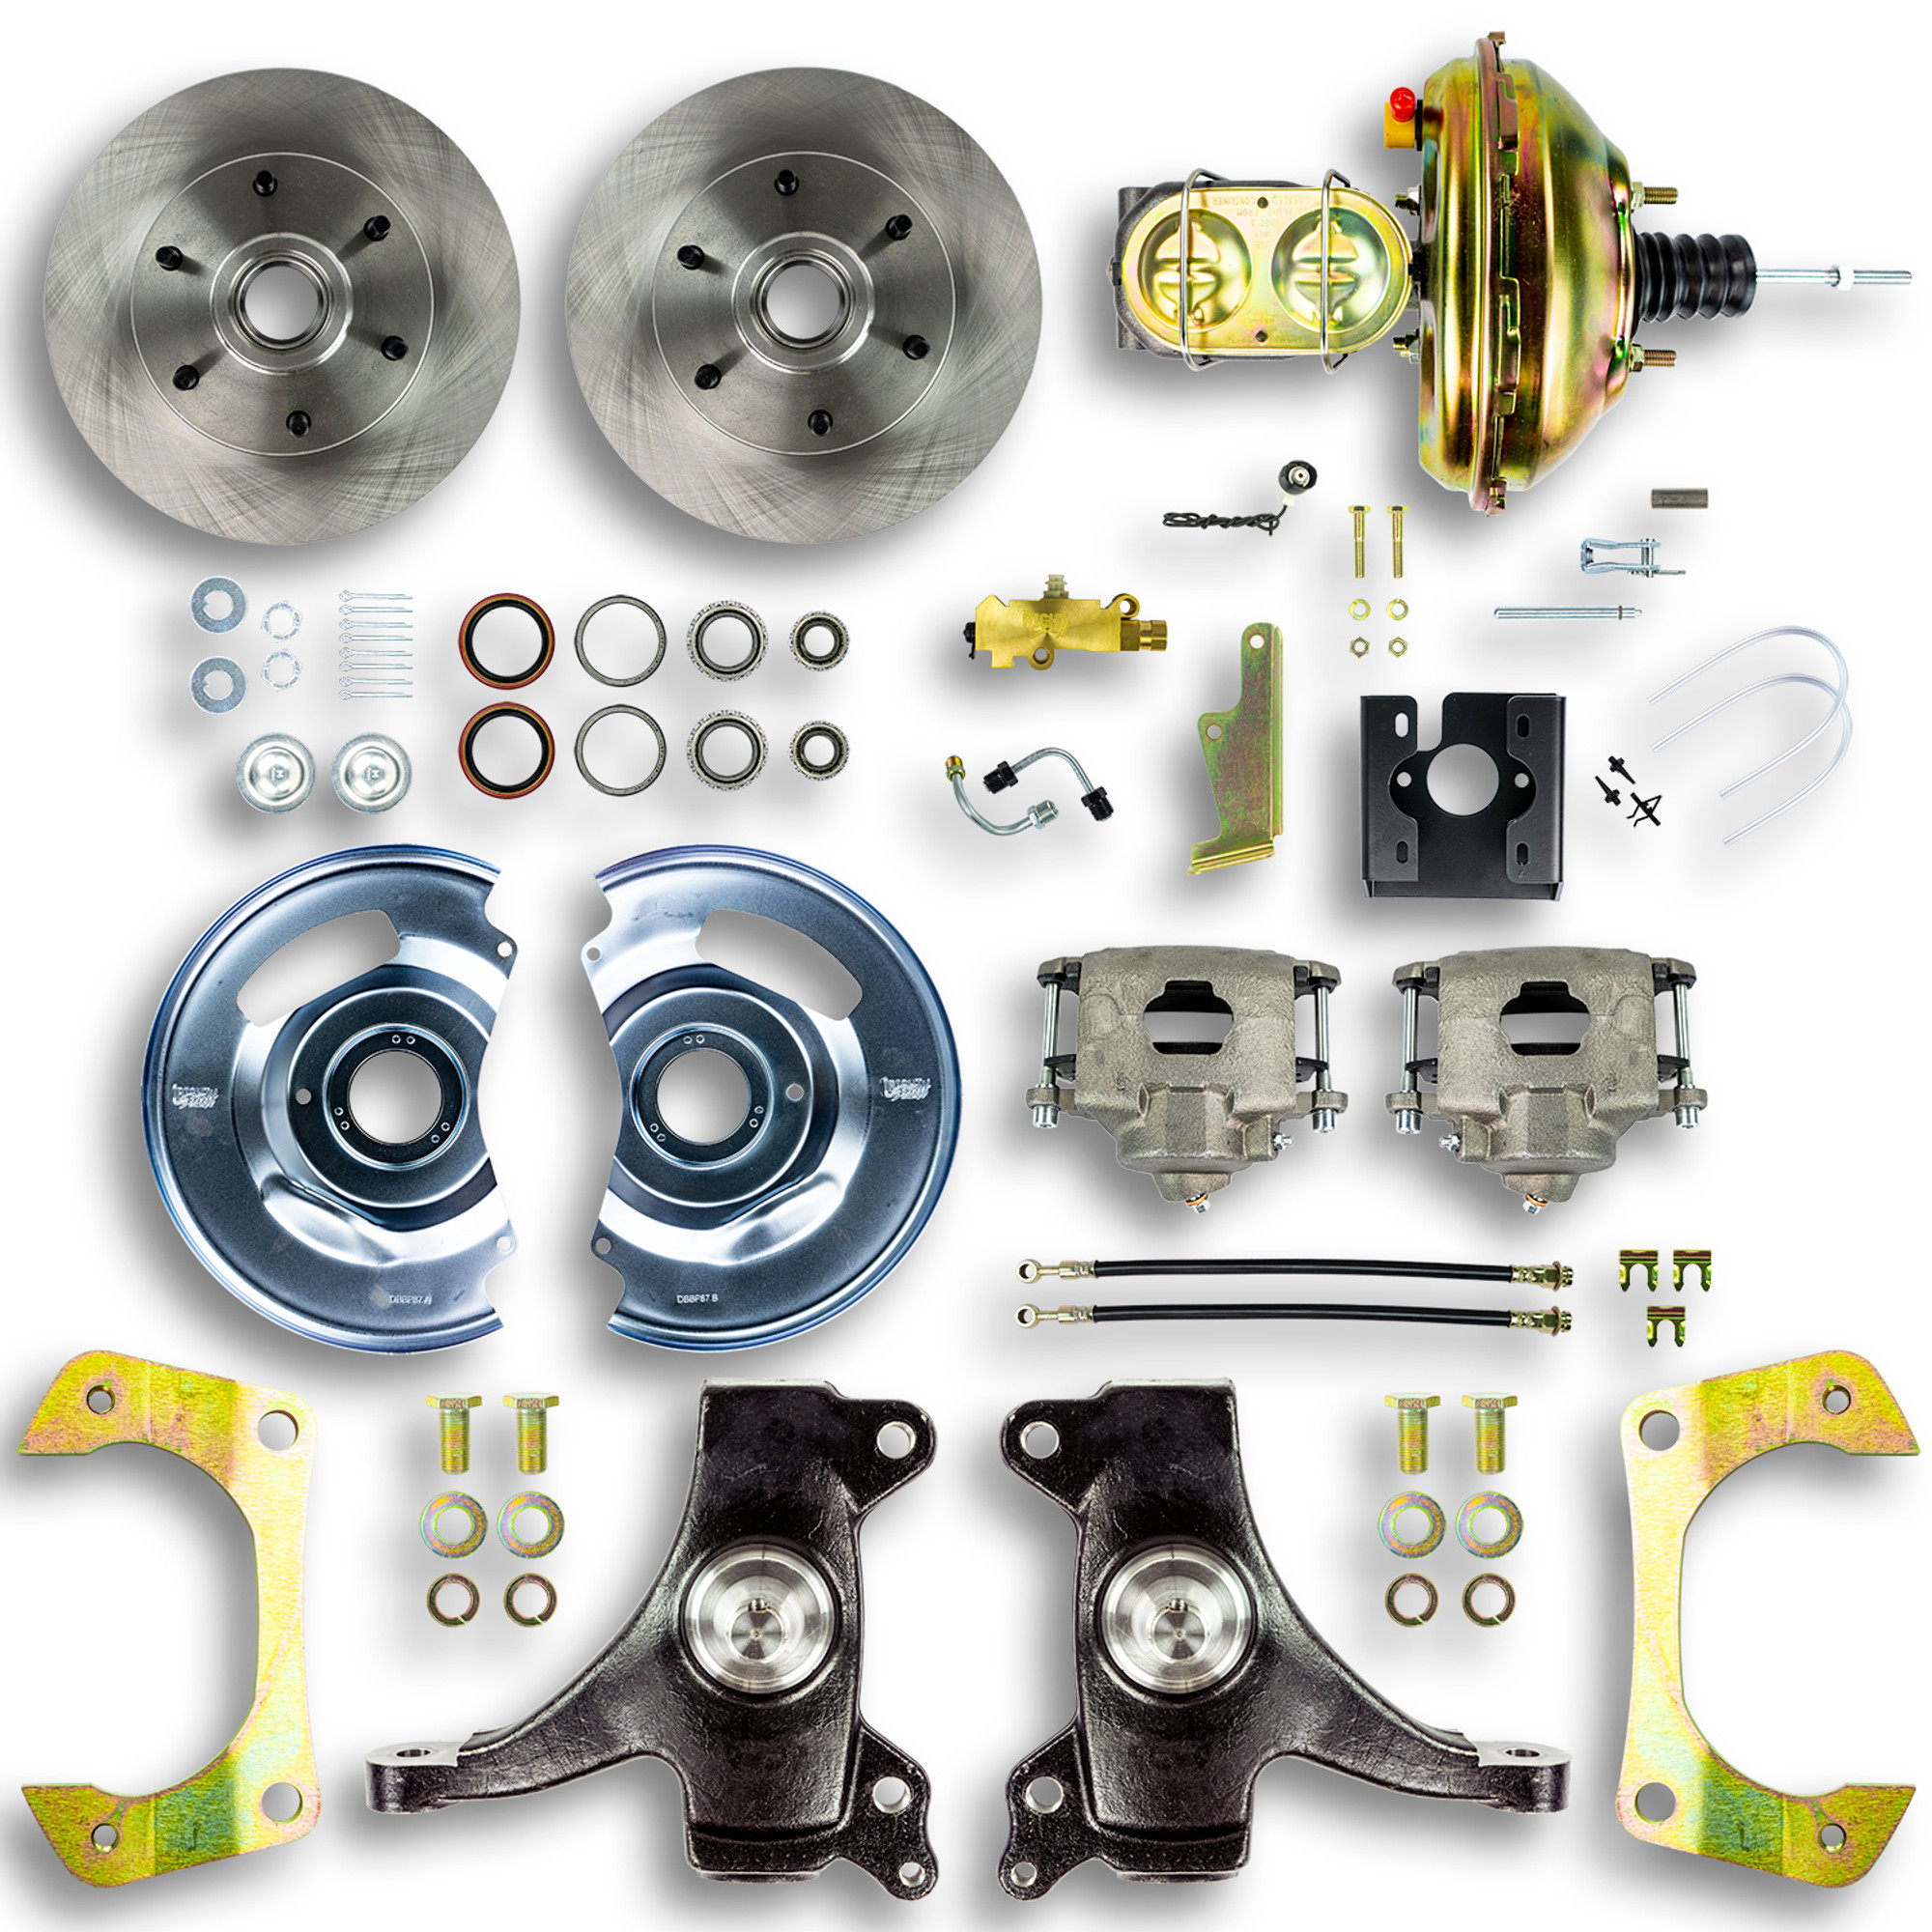 The Right Stuff TDC6726D Brake System, Street Series, Disc Conversion, Front, 1 Piston Caliper, 11 in Rotors, 2 in Drop Spindles, Iron, Natural, 2WD, GM Fullsize Truck 1967-70, Kit